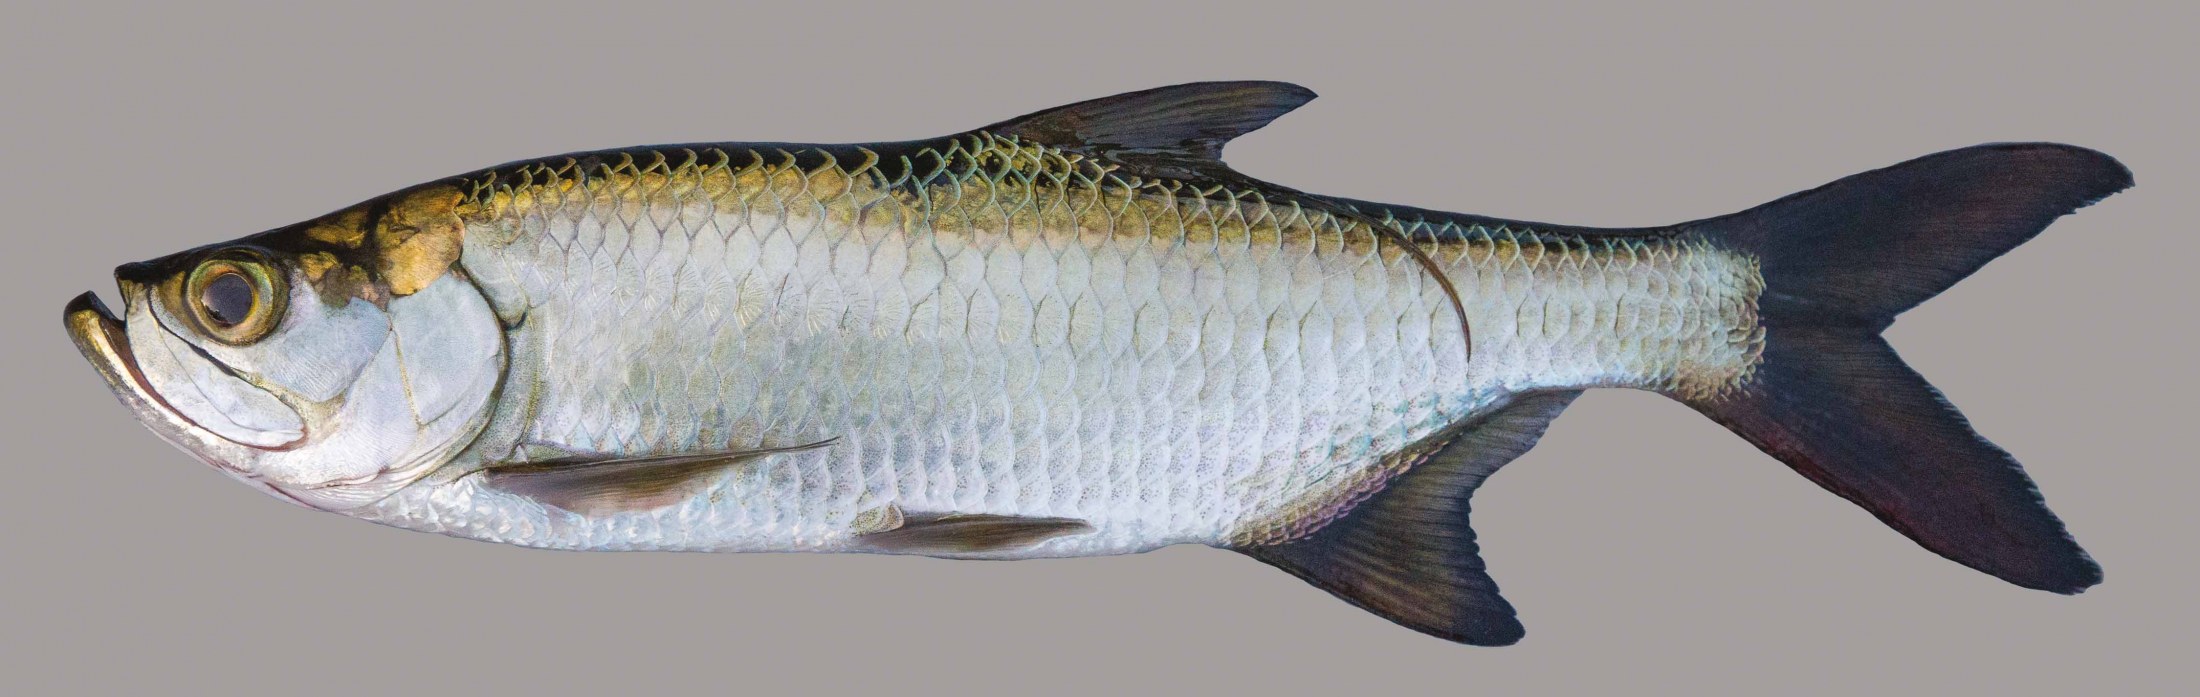 Lateral view of a tarpon